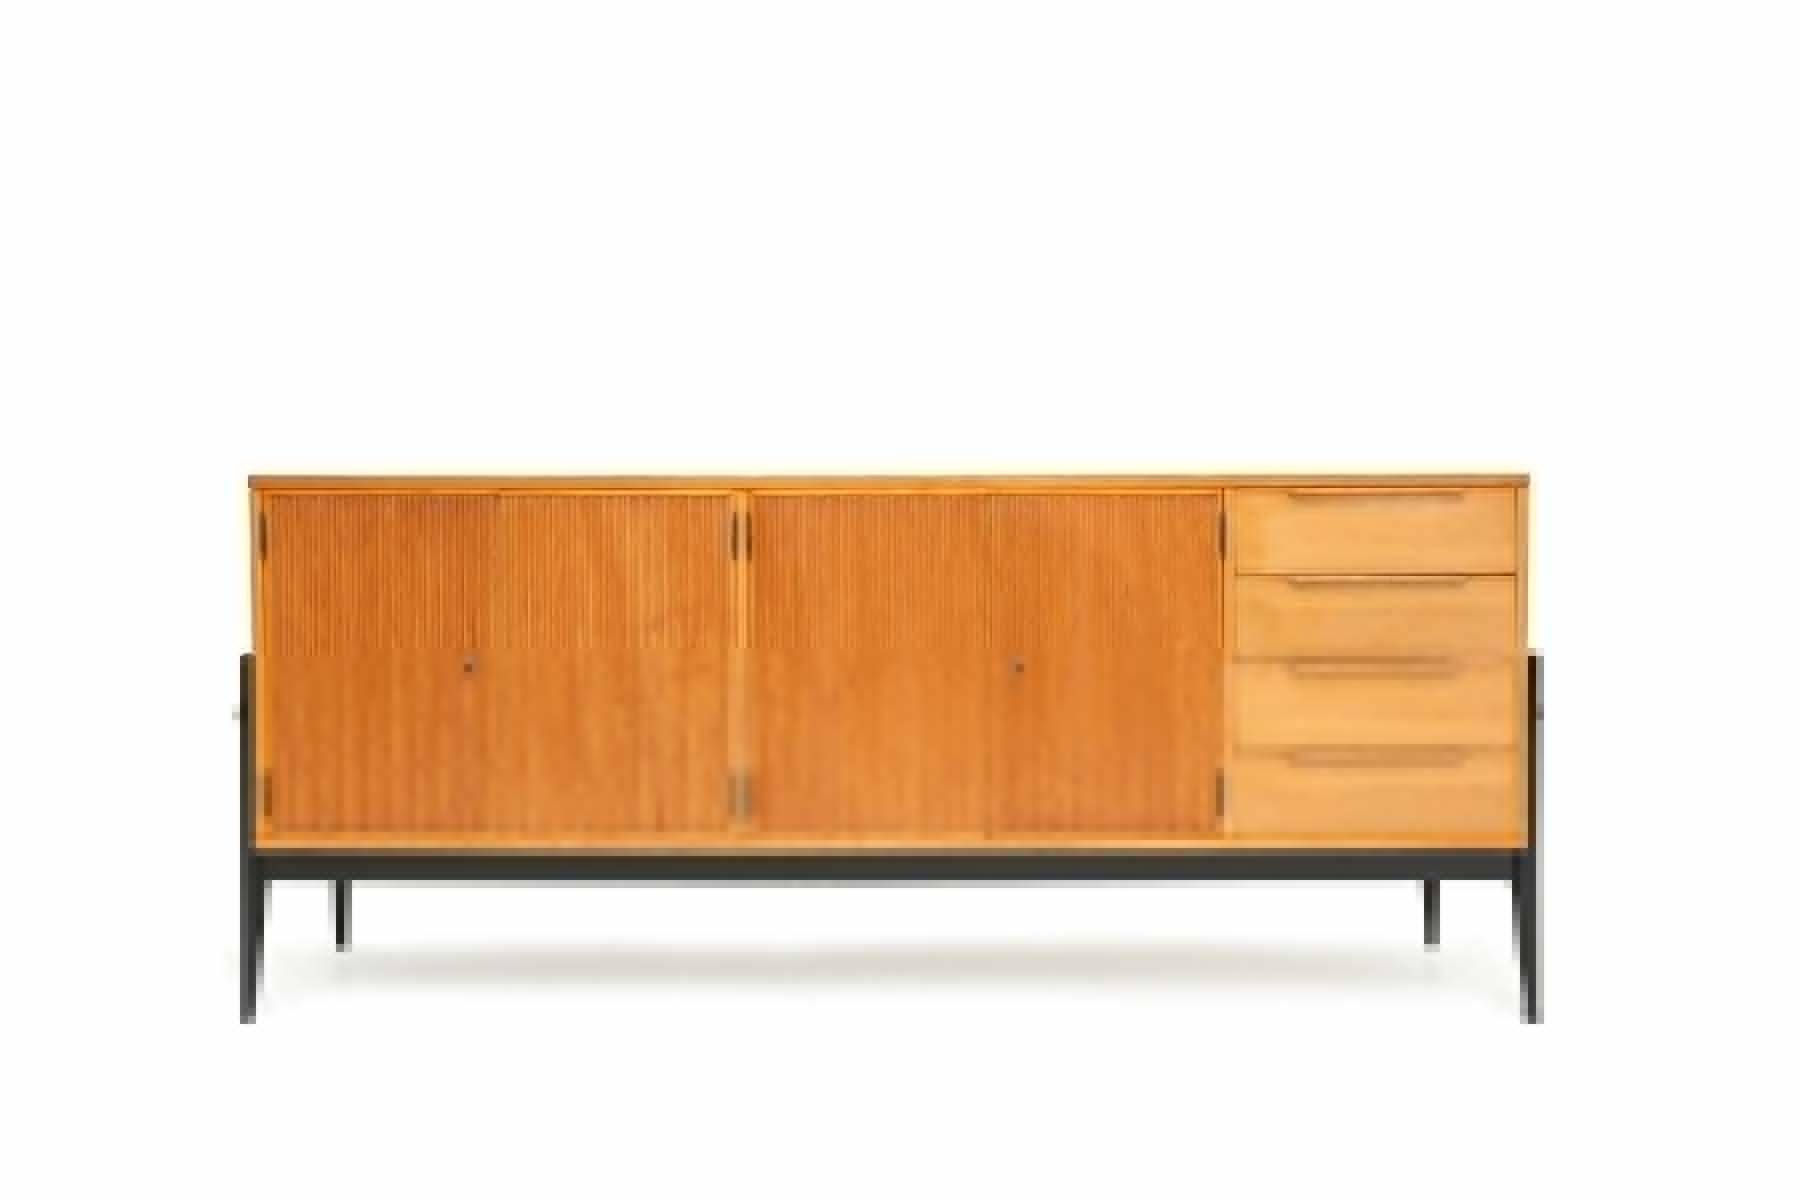 Belgian Wooden Sideboard For Sale At Pamono Regarding 2018 Wooden Sideboards (View 8 of 15)